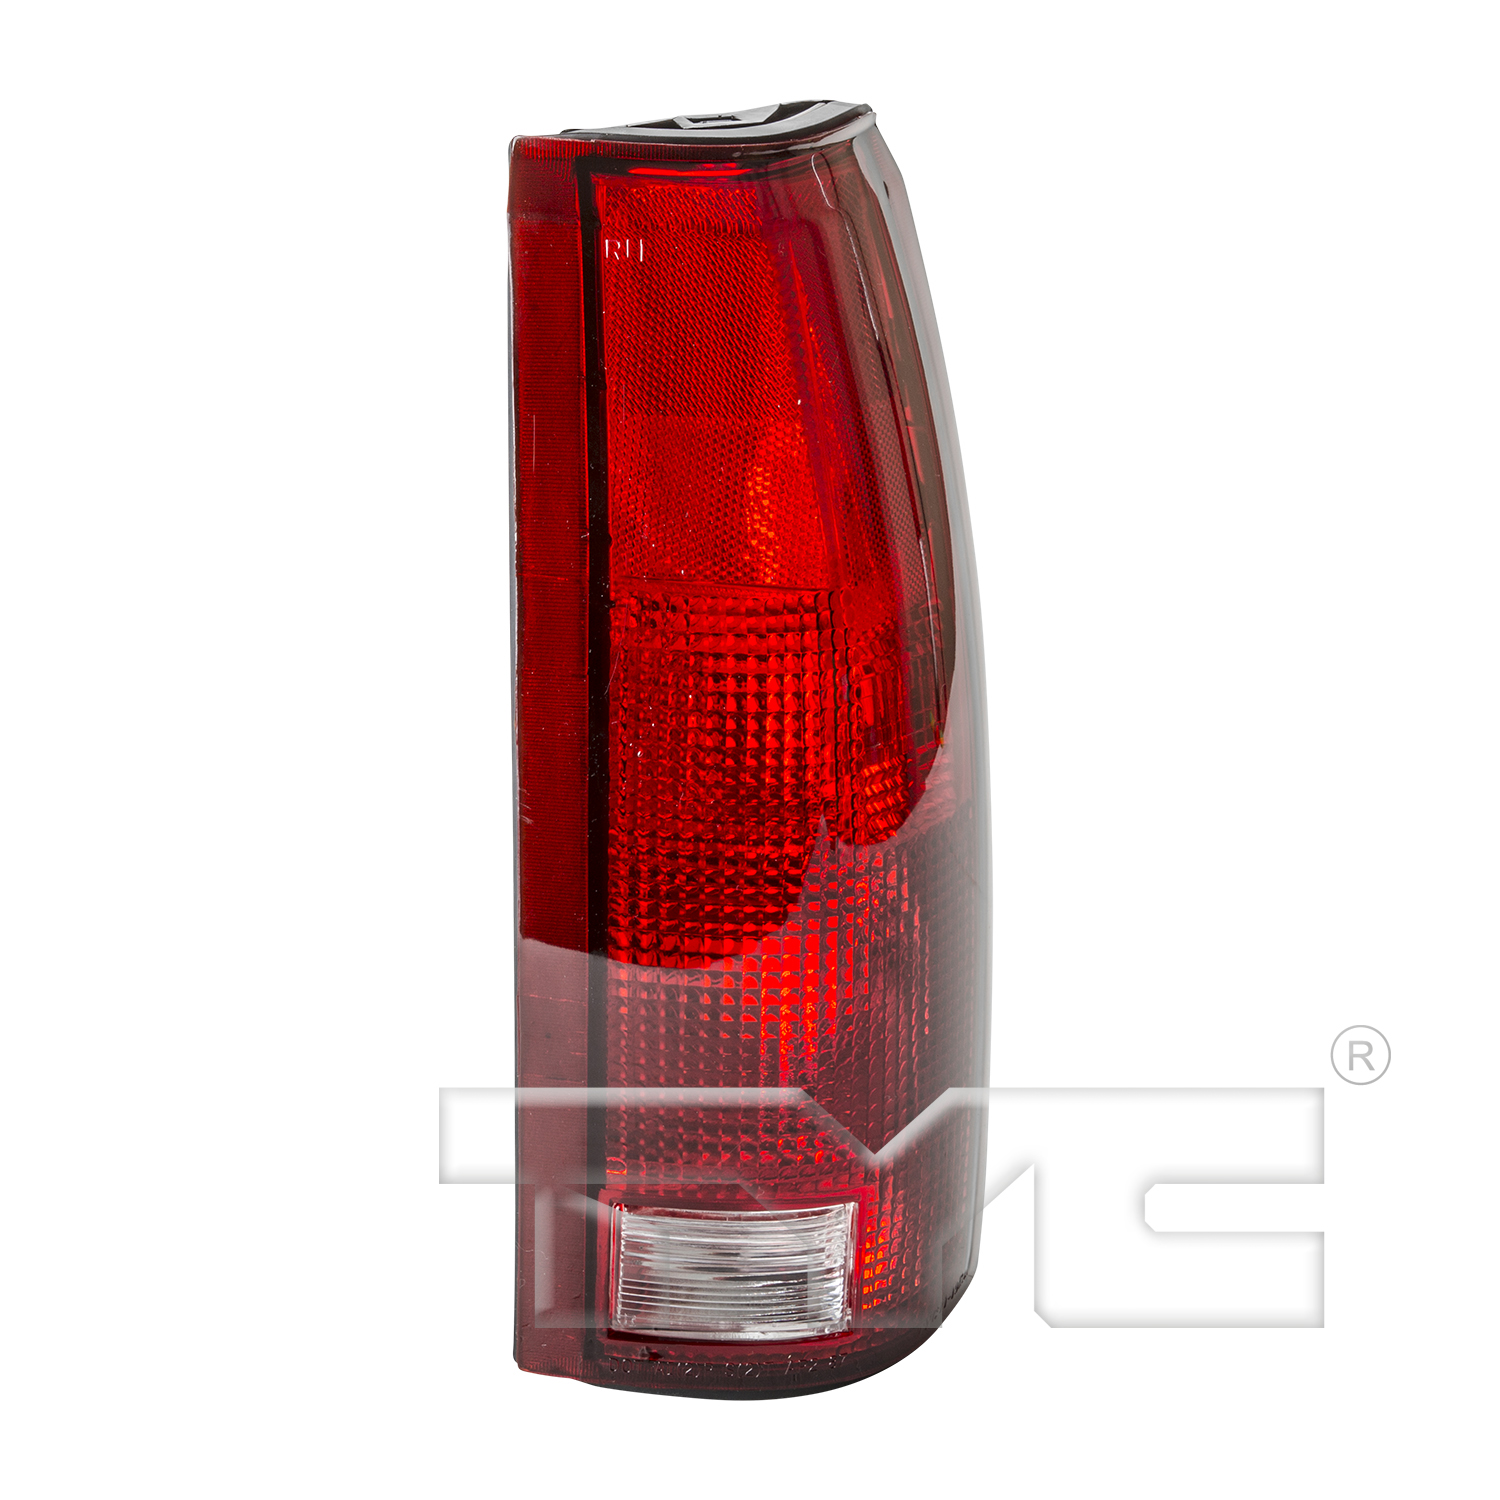 Aftermarket TAILLIGHTS for GMC - K1500, K1500,88-99,RT Taillamp lens